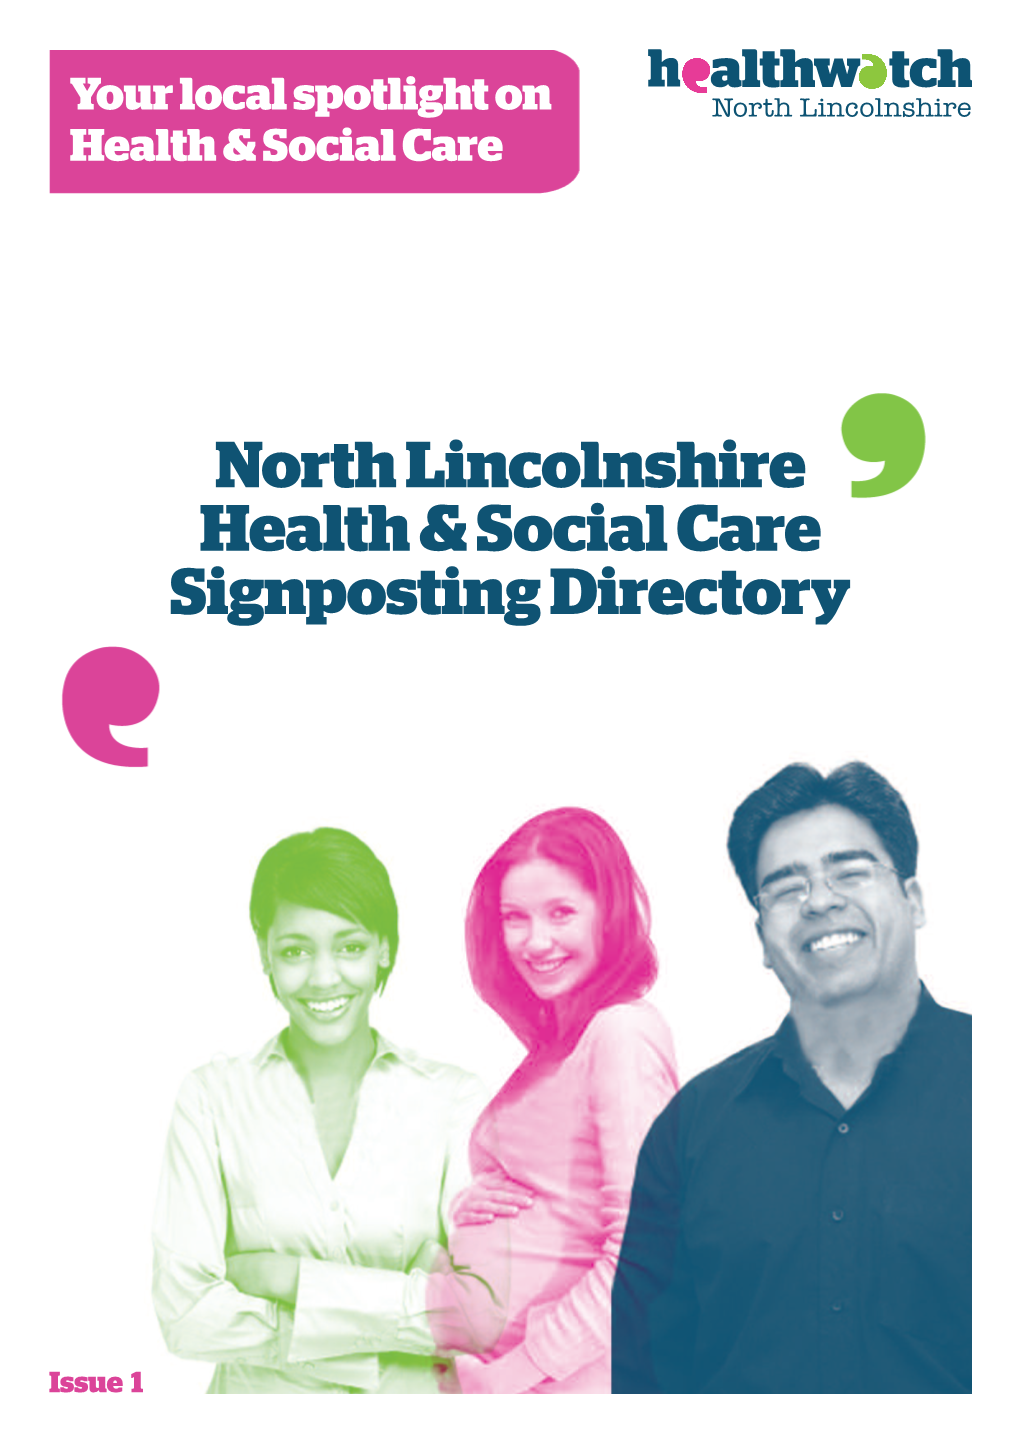 North Lincolnshire Health & Social Care Signposting Directory